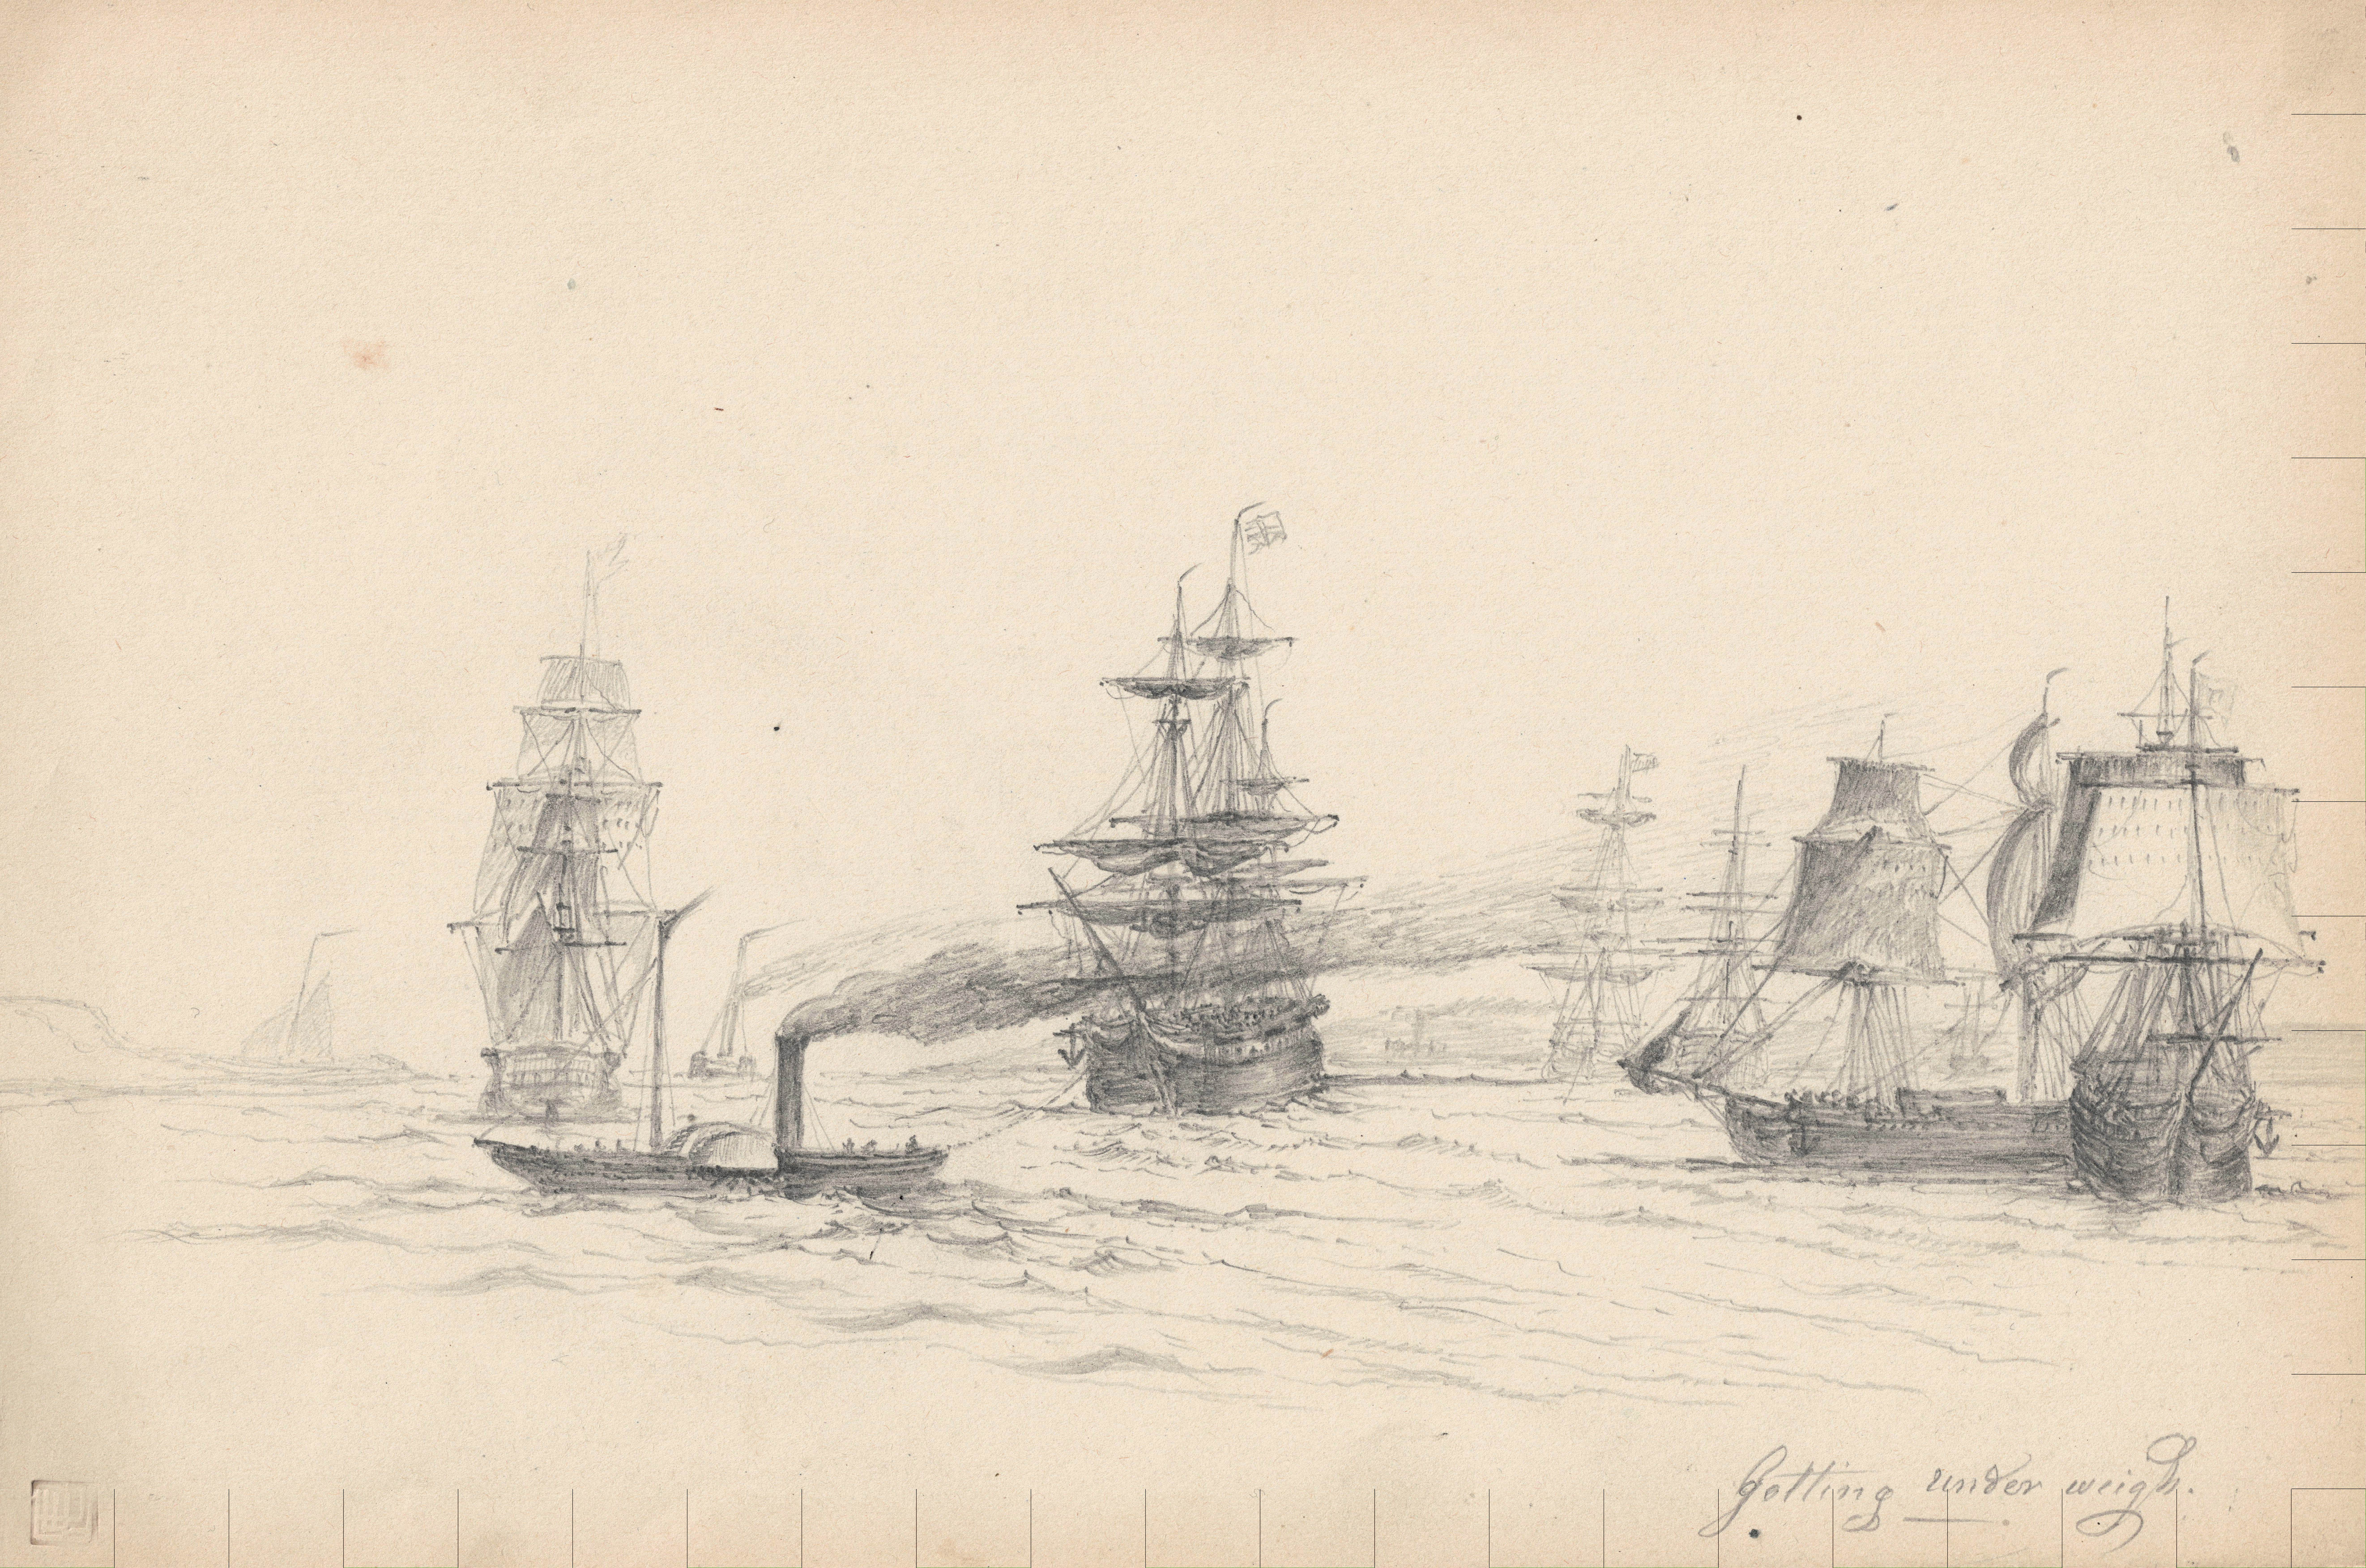 C* A* C* (19TH CENTURY) - A COLLECTION OF 9 PENCIL DRAWINGS ALL WITH TITLES INCLUDING 'SLOOP OF WAR' - Image 6 of 9